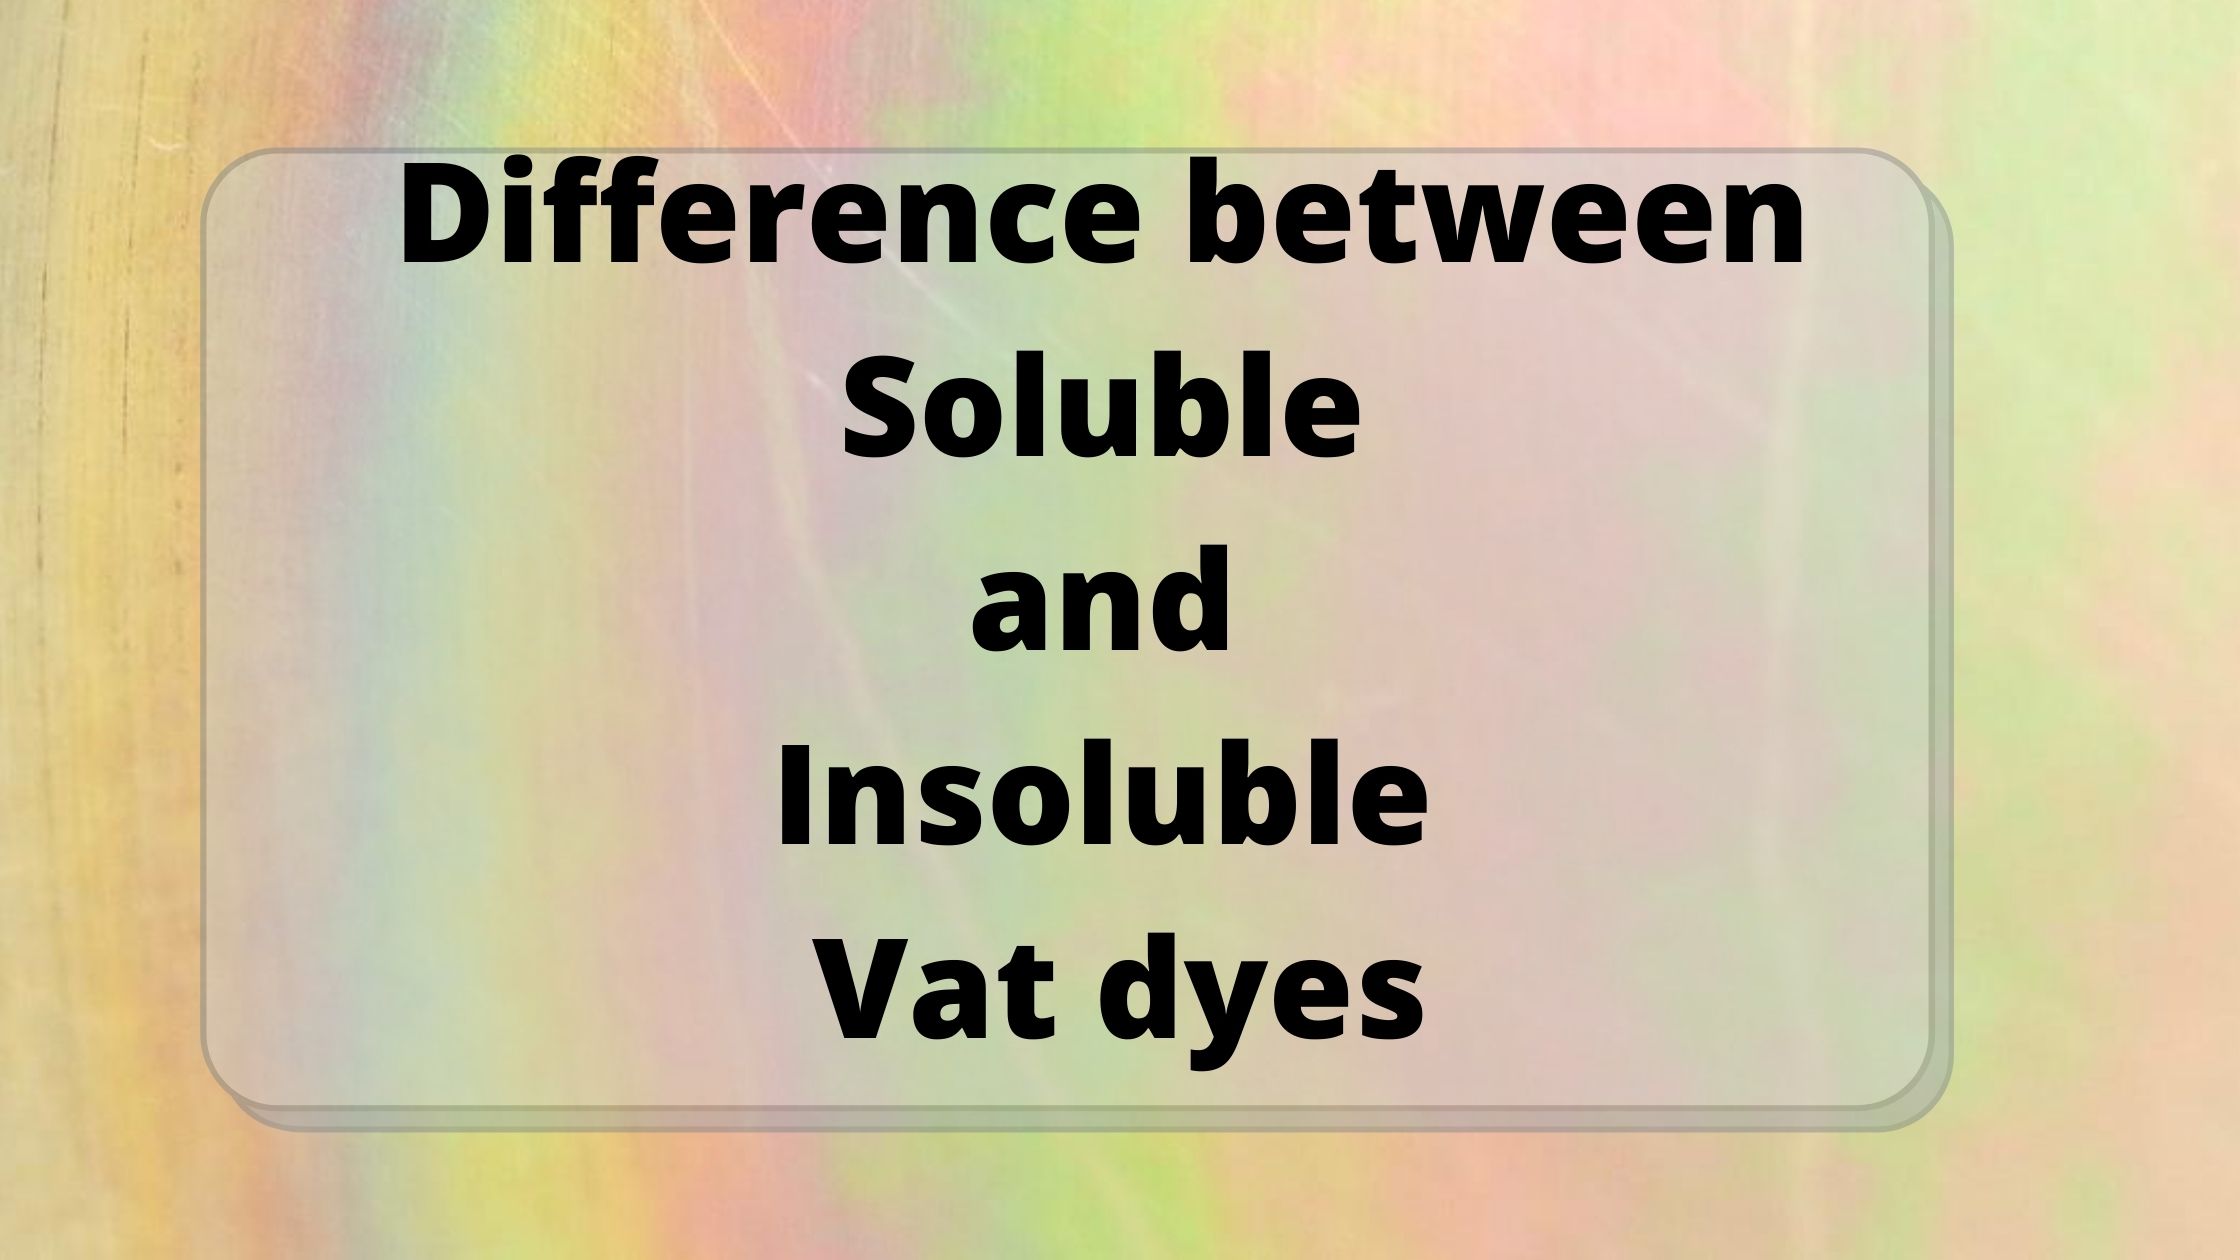 Difference between Soluble and Insoluble Vat dyes